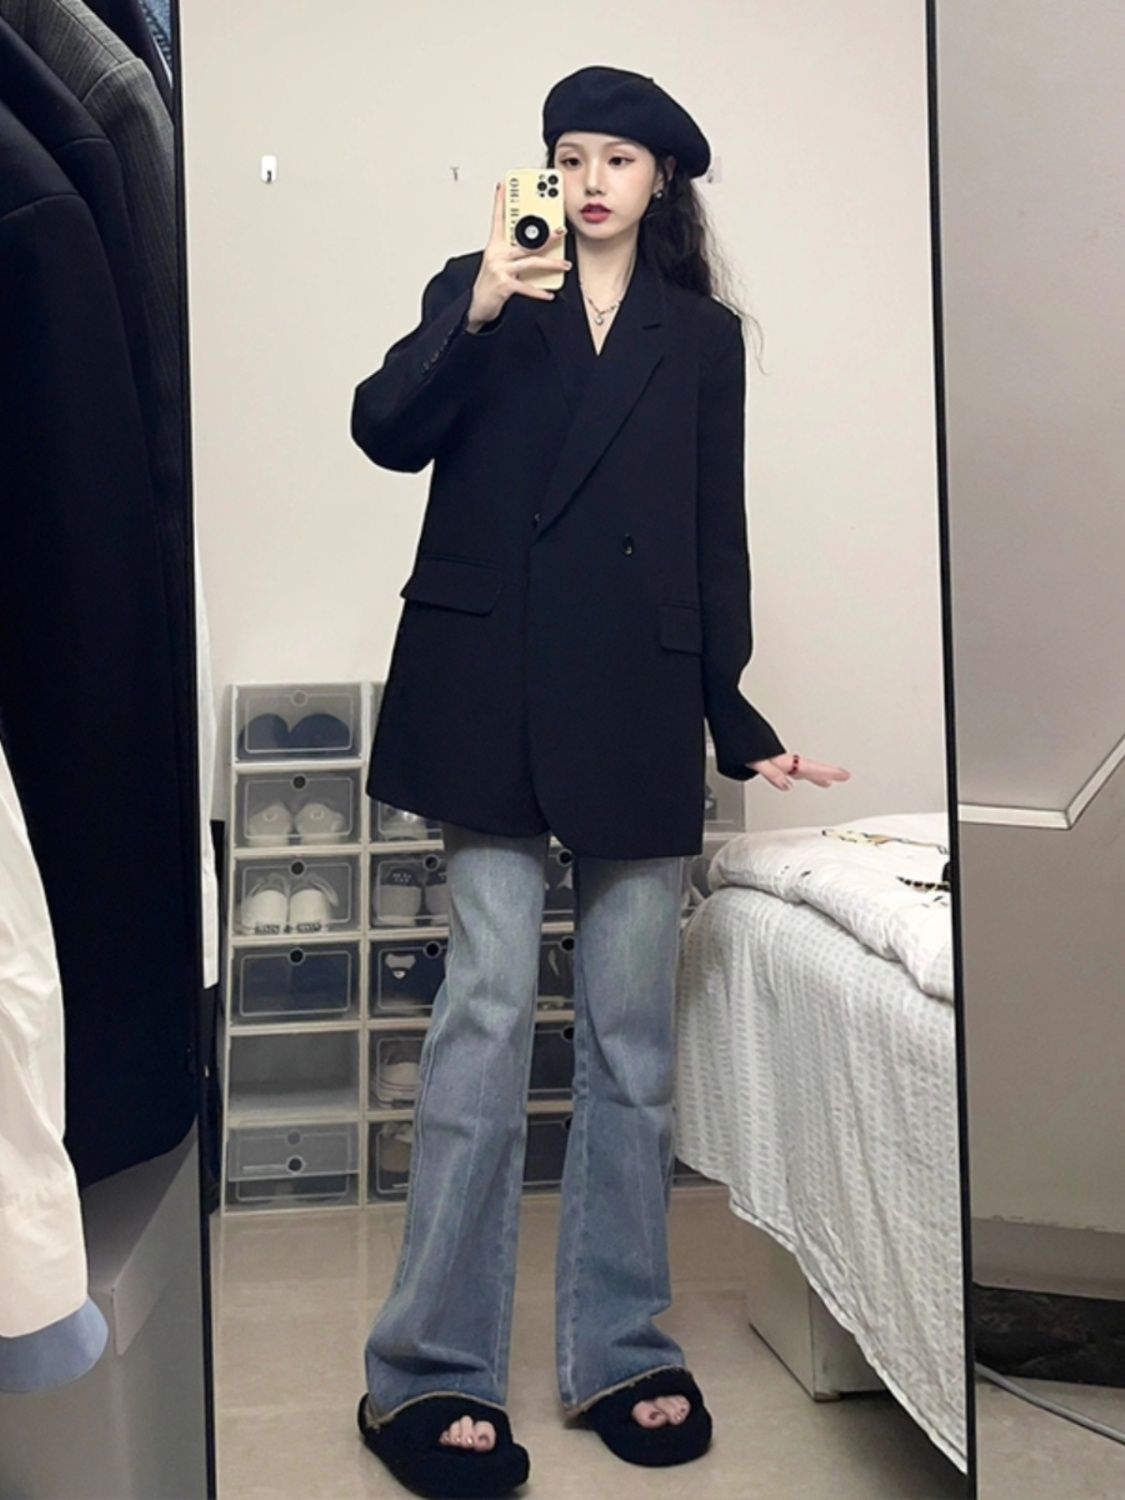 Black suit jacket for women spring and autumn new Korean style high-end fashion versatile small slim slim suit top trendy